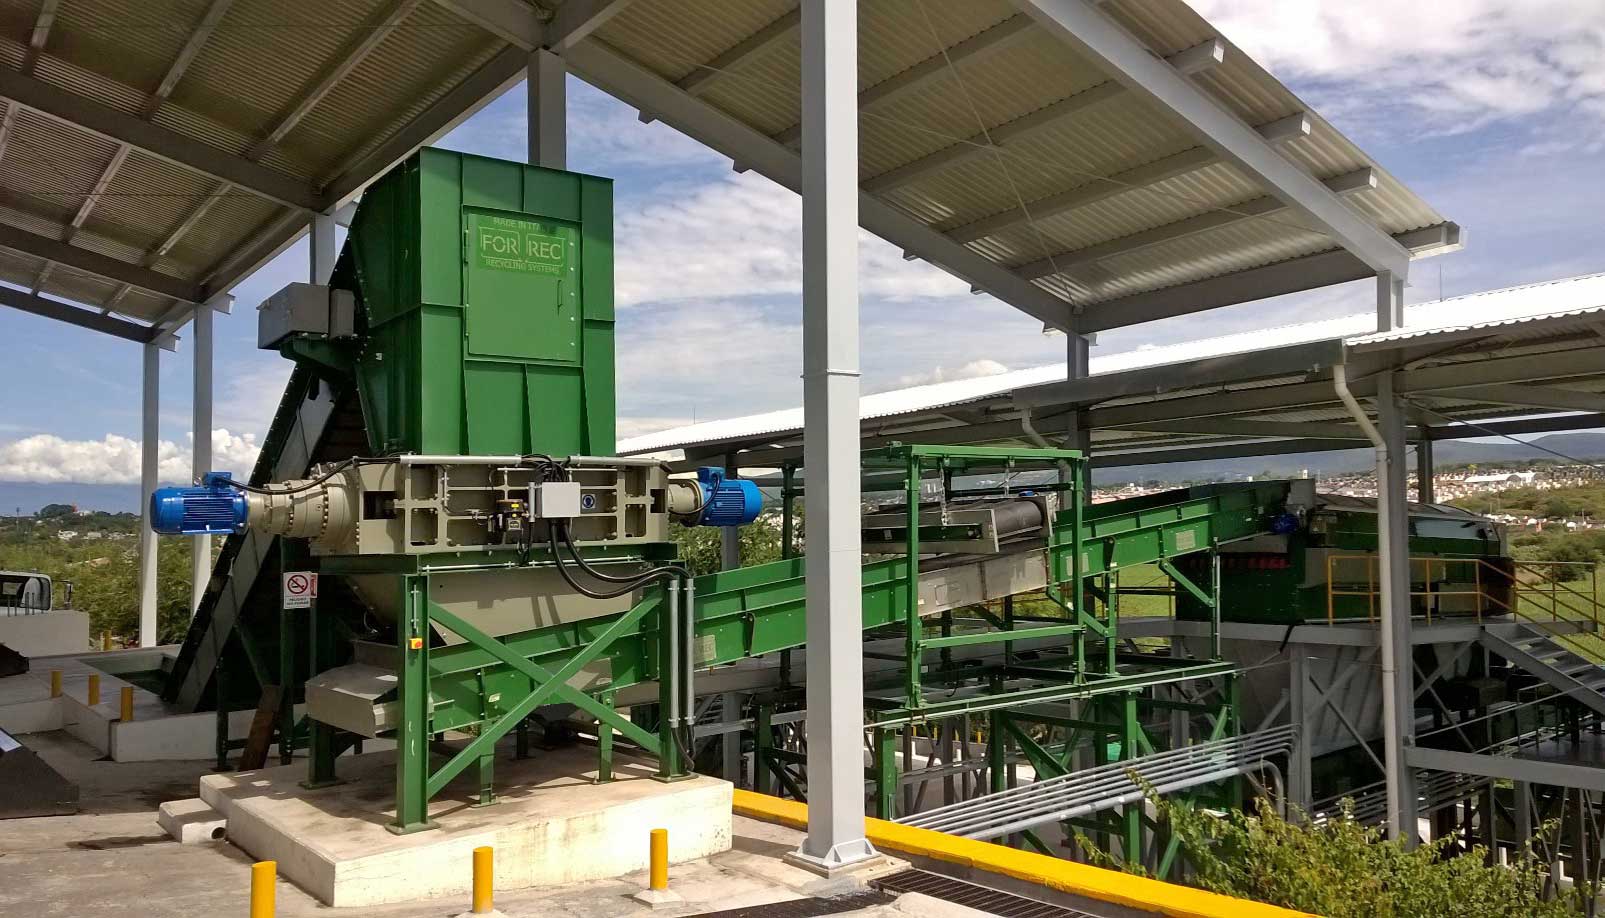 Municipal solid waste shredders (MSW) and plants